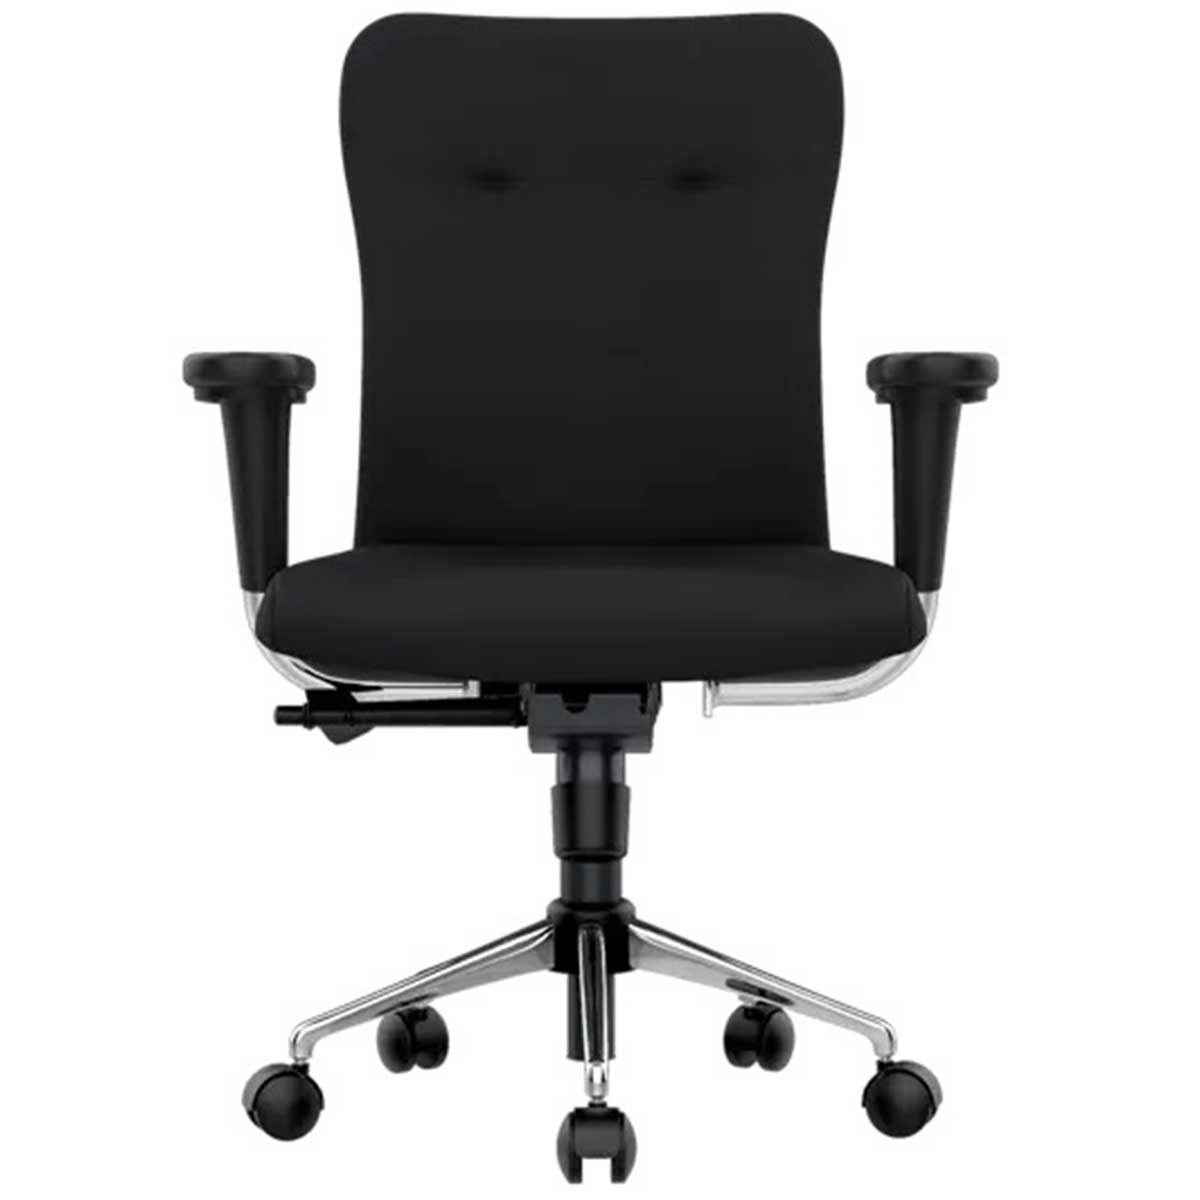 Fabric Office Chair Manufacturers, Suppliers in Rohini